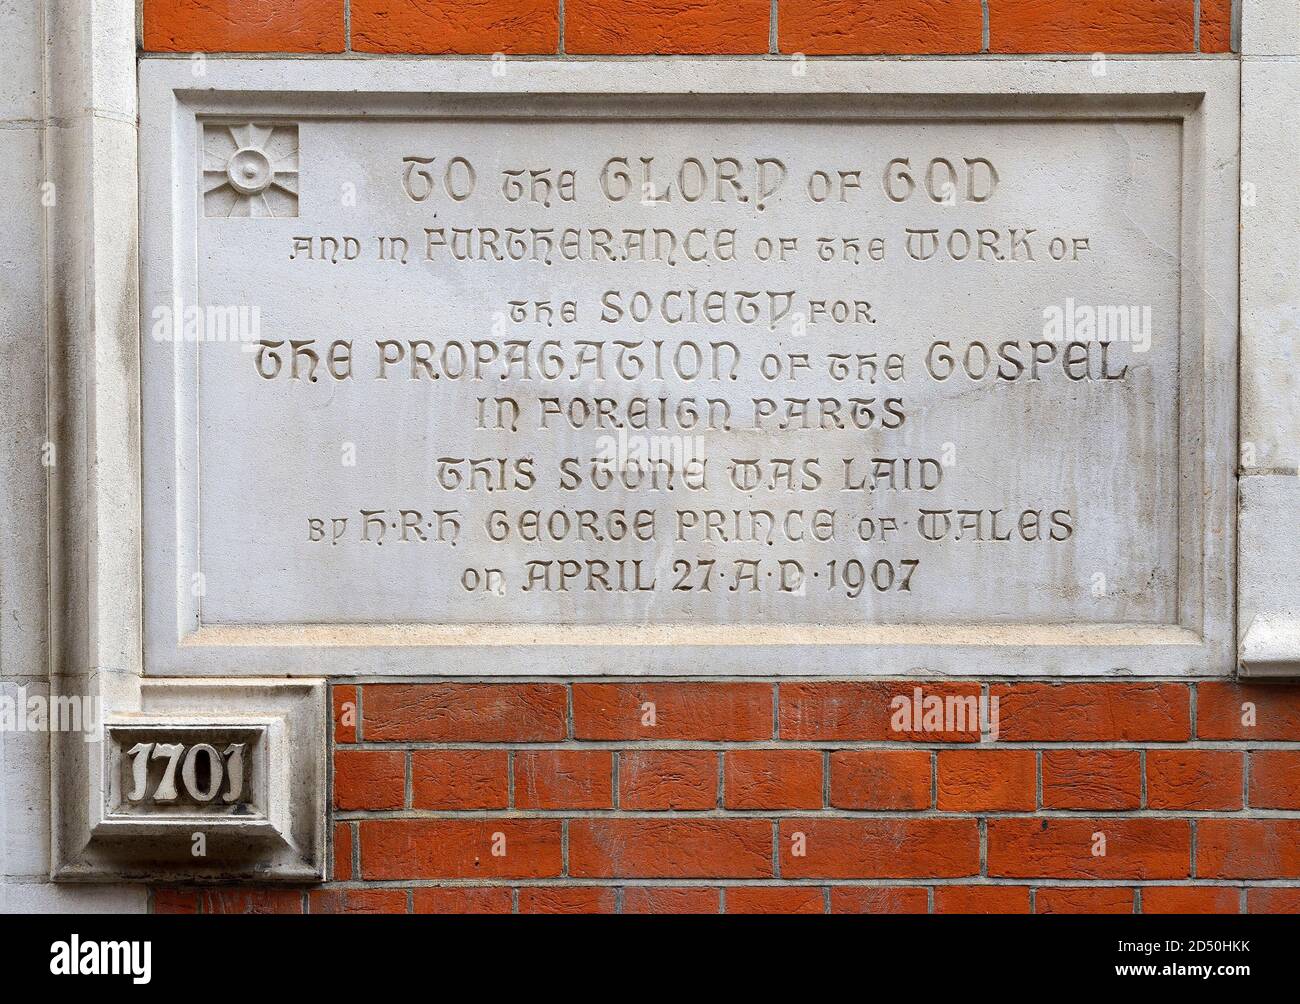 London, England, UK. Society for the Propagation of the Gospel in Foreign Parts, Tufton Street. Plaque by the entrance Stock Photo